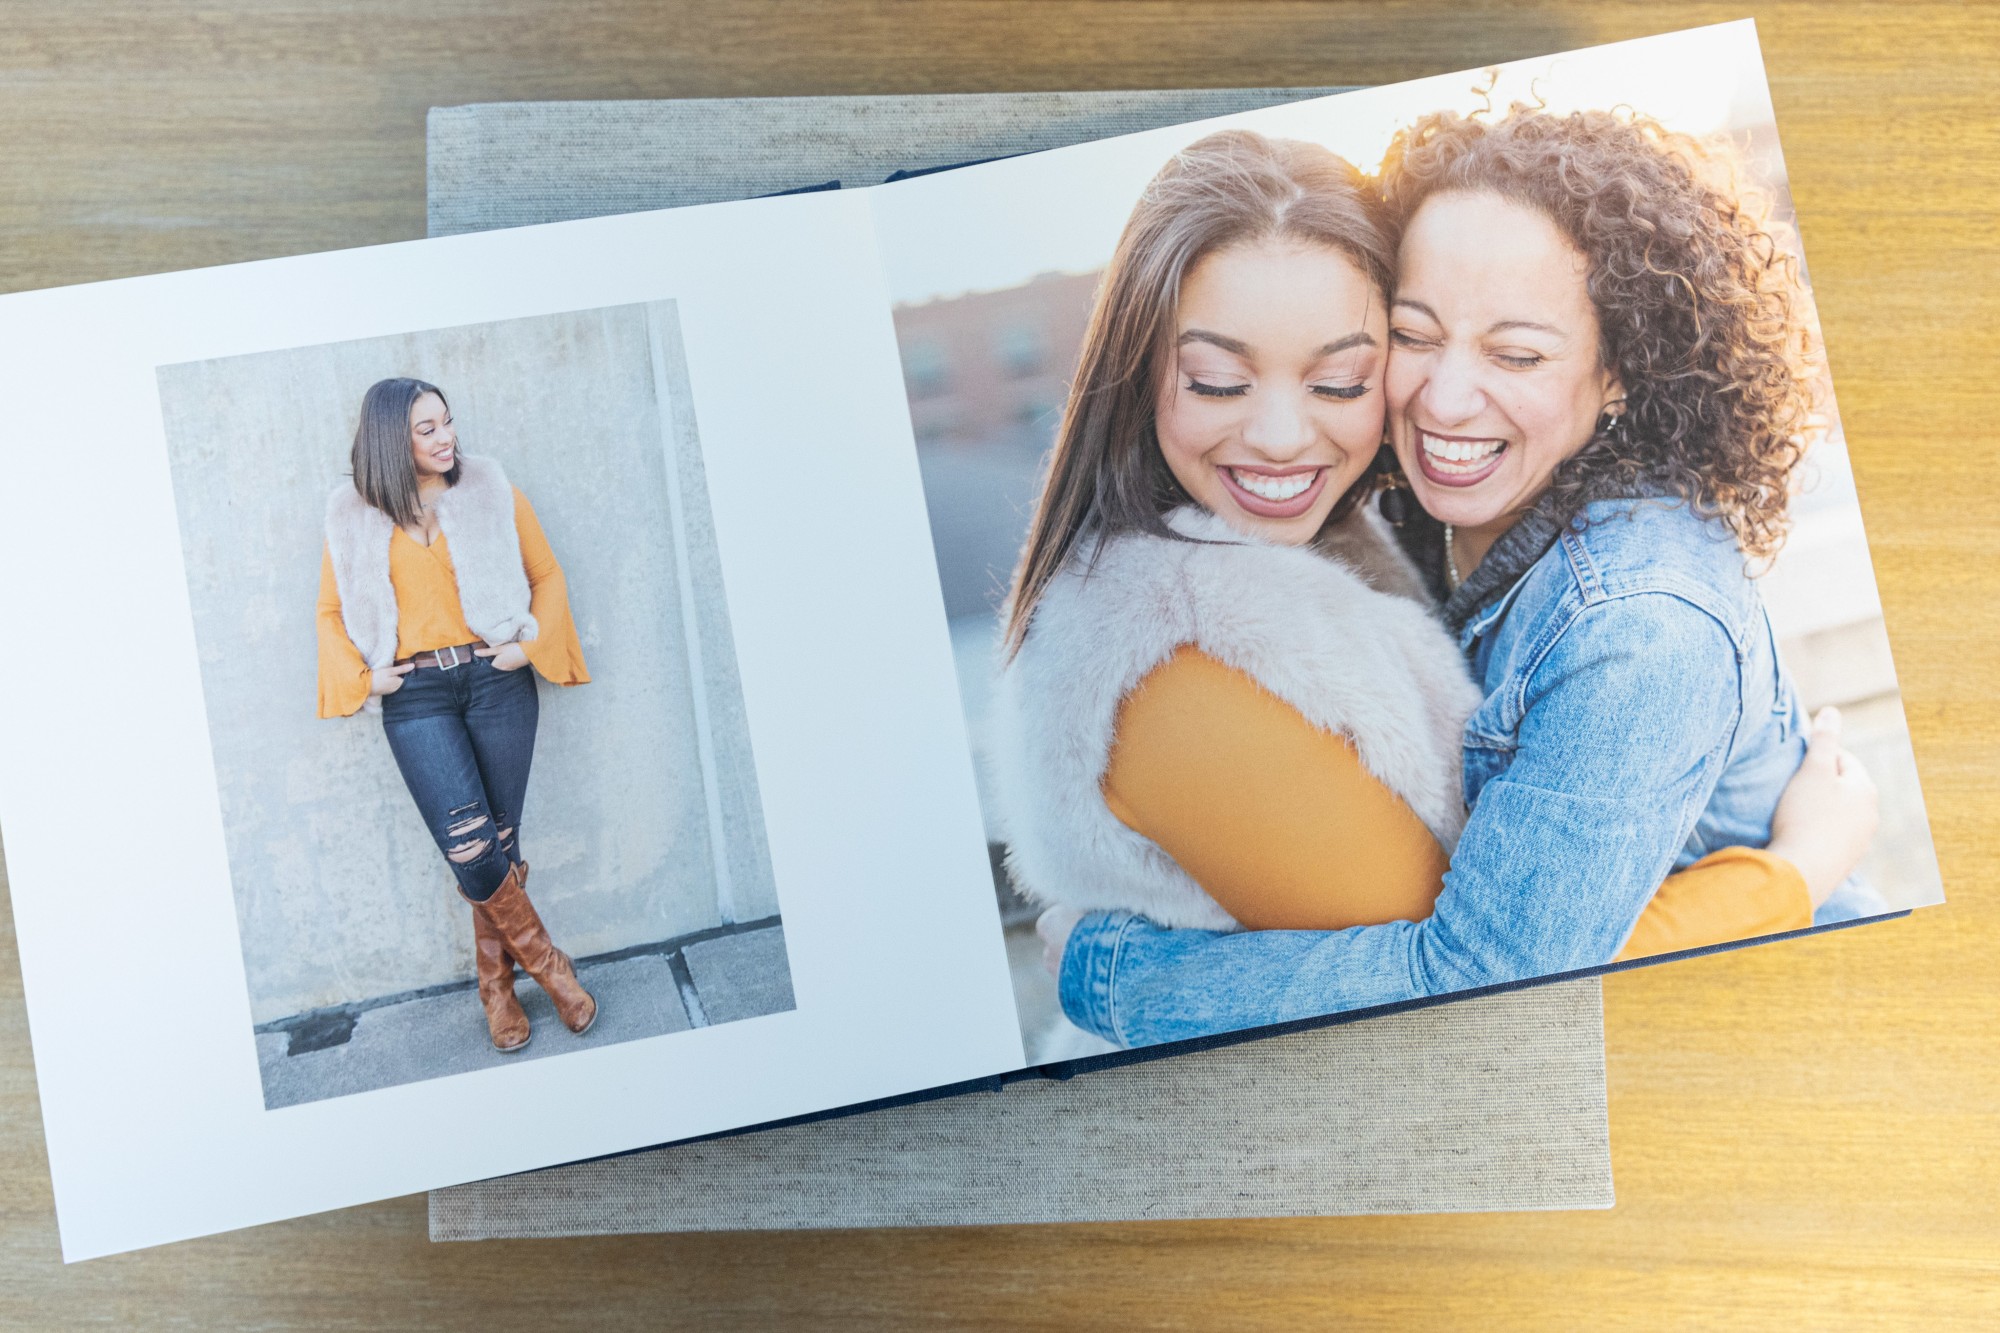 Photo albums are so special! It's such a great way to have your photos after your session with us! Click here to learn more about what you can do with your photos after your portrait session with Wisp + Willow Photography Co.!